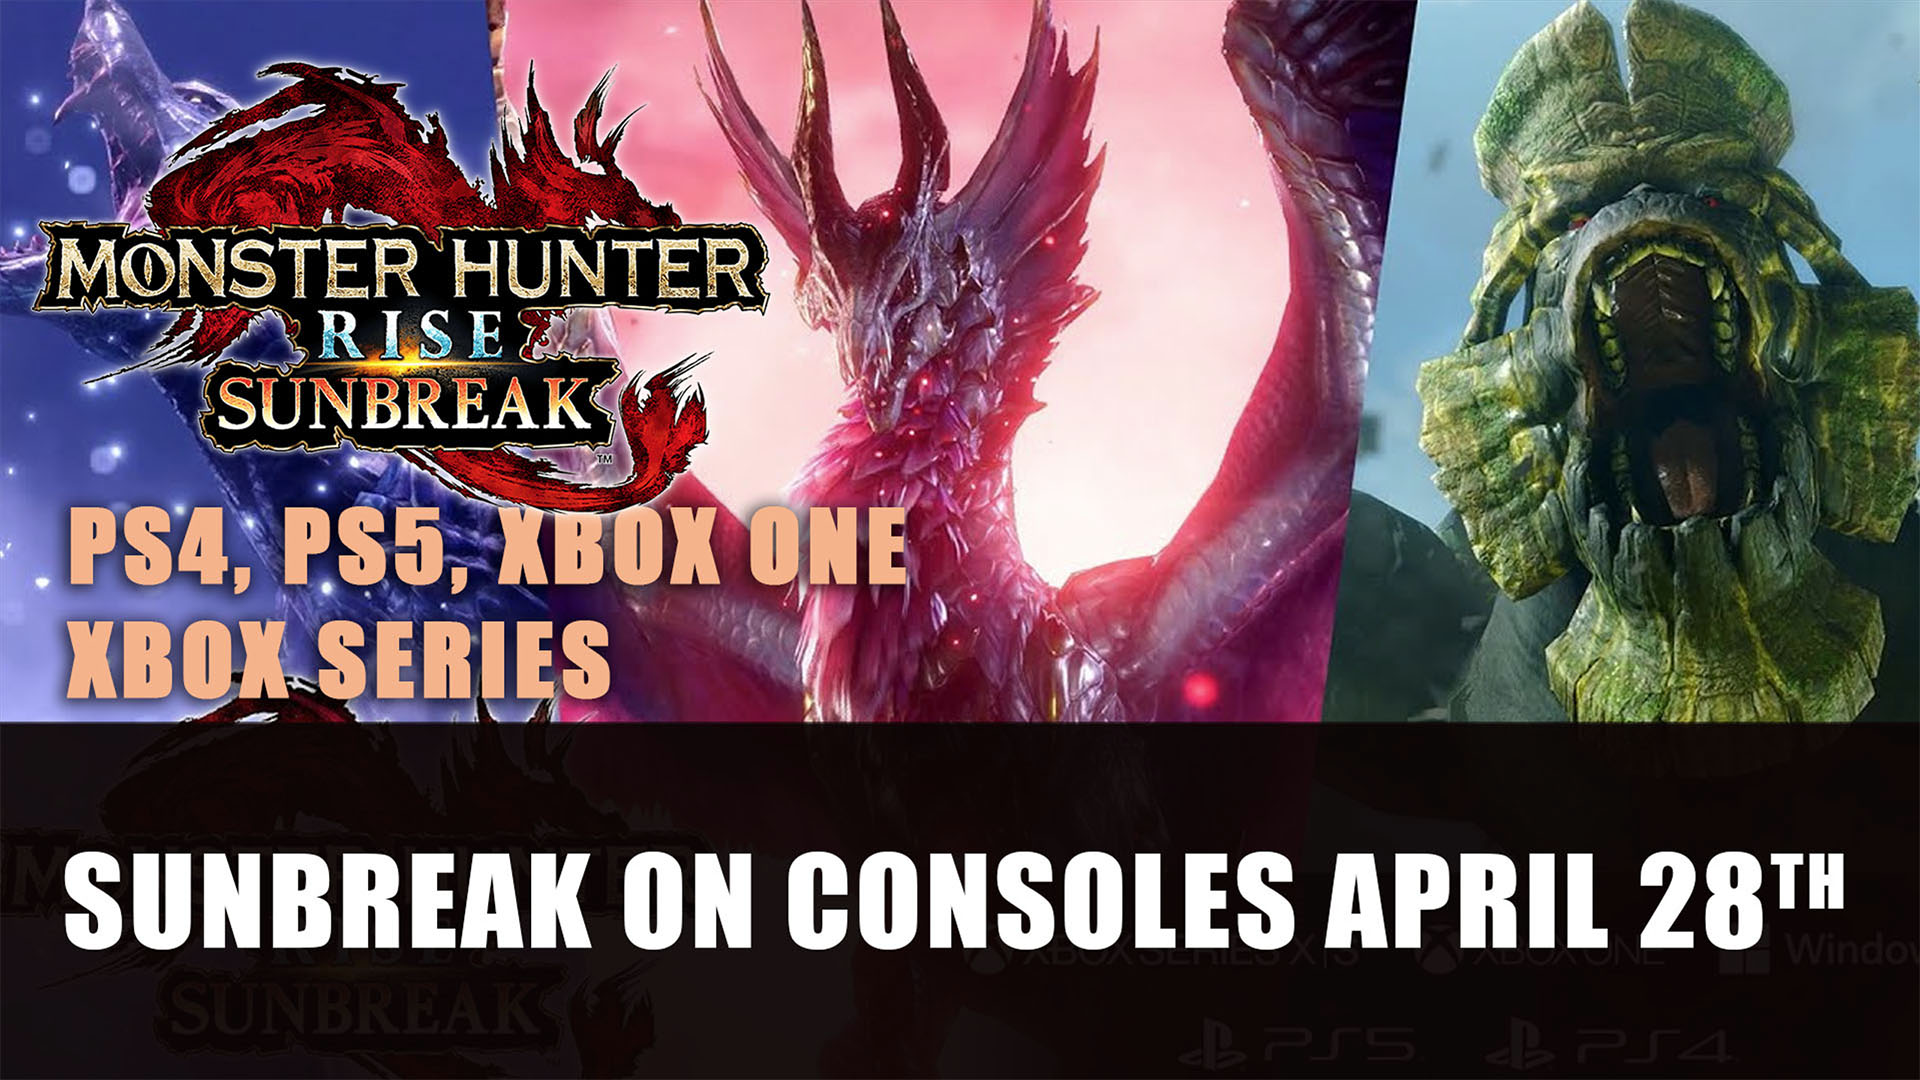 Monster Hunter Rise Sunbreak Expansion Hits PS4, PS5, Xbox One, and Series  X|S in April - Fextralife | PS4-Spiele